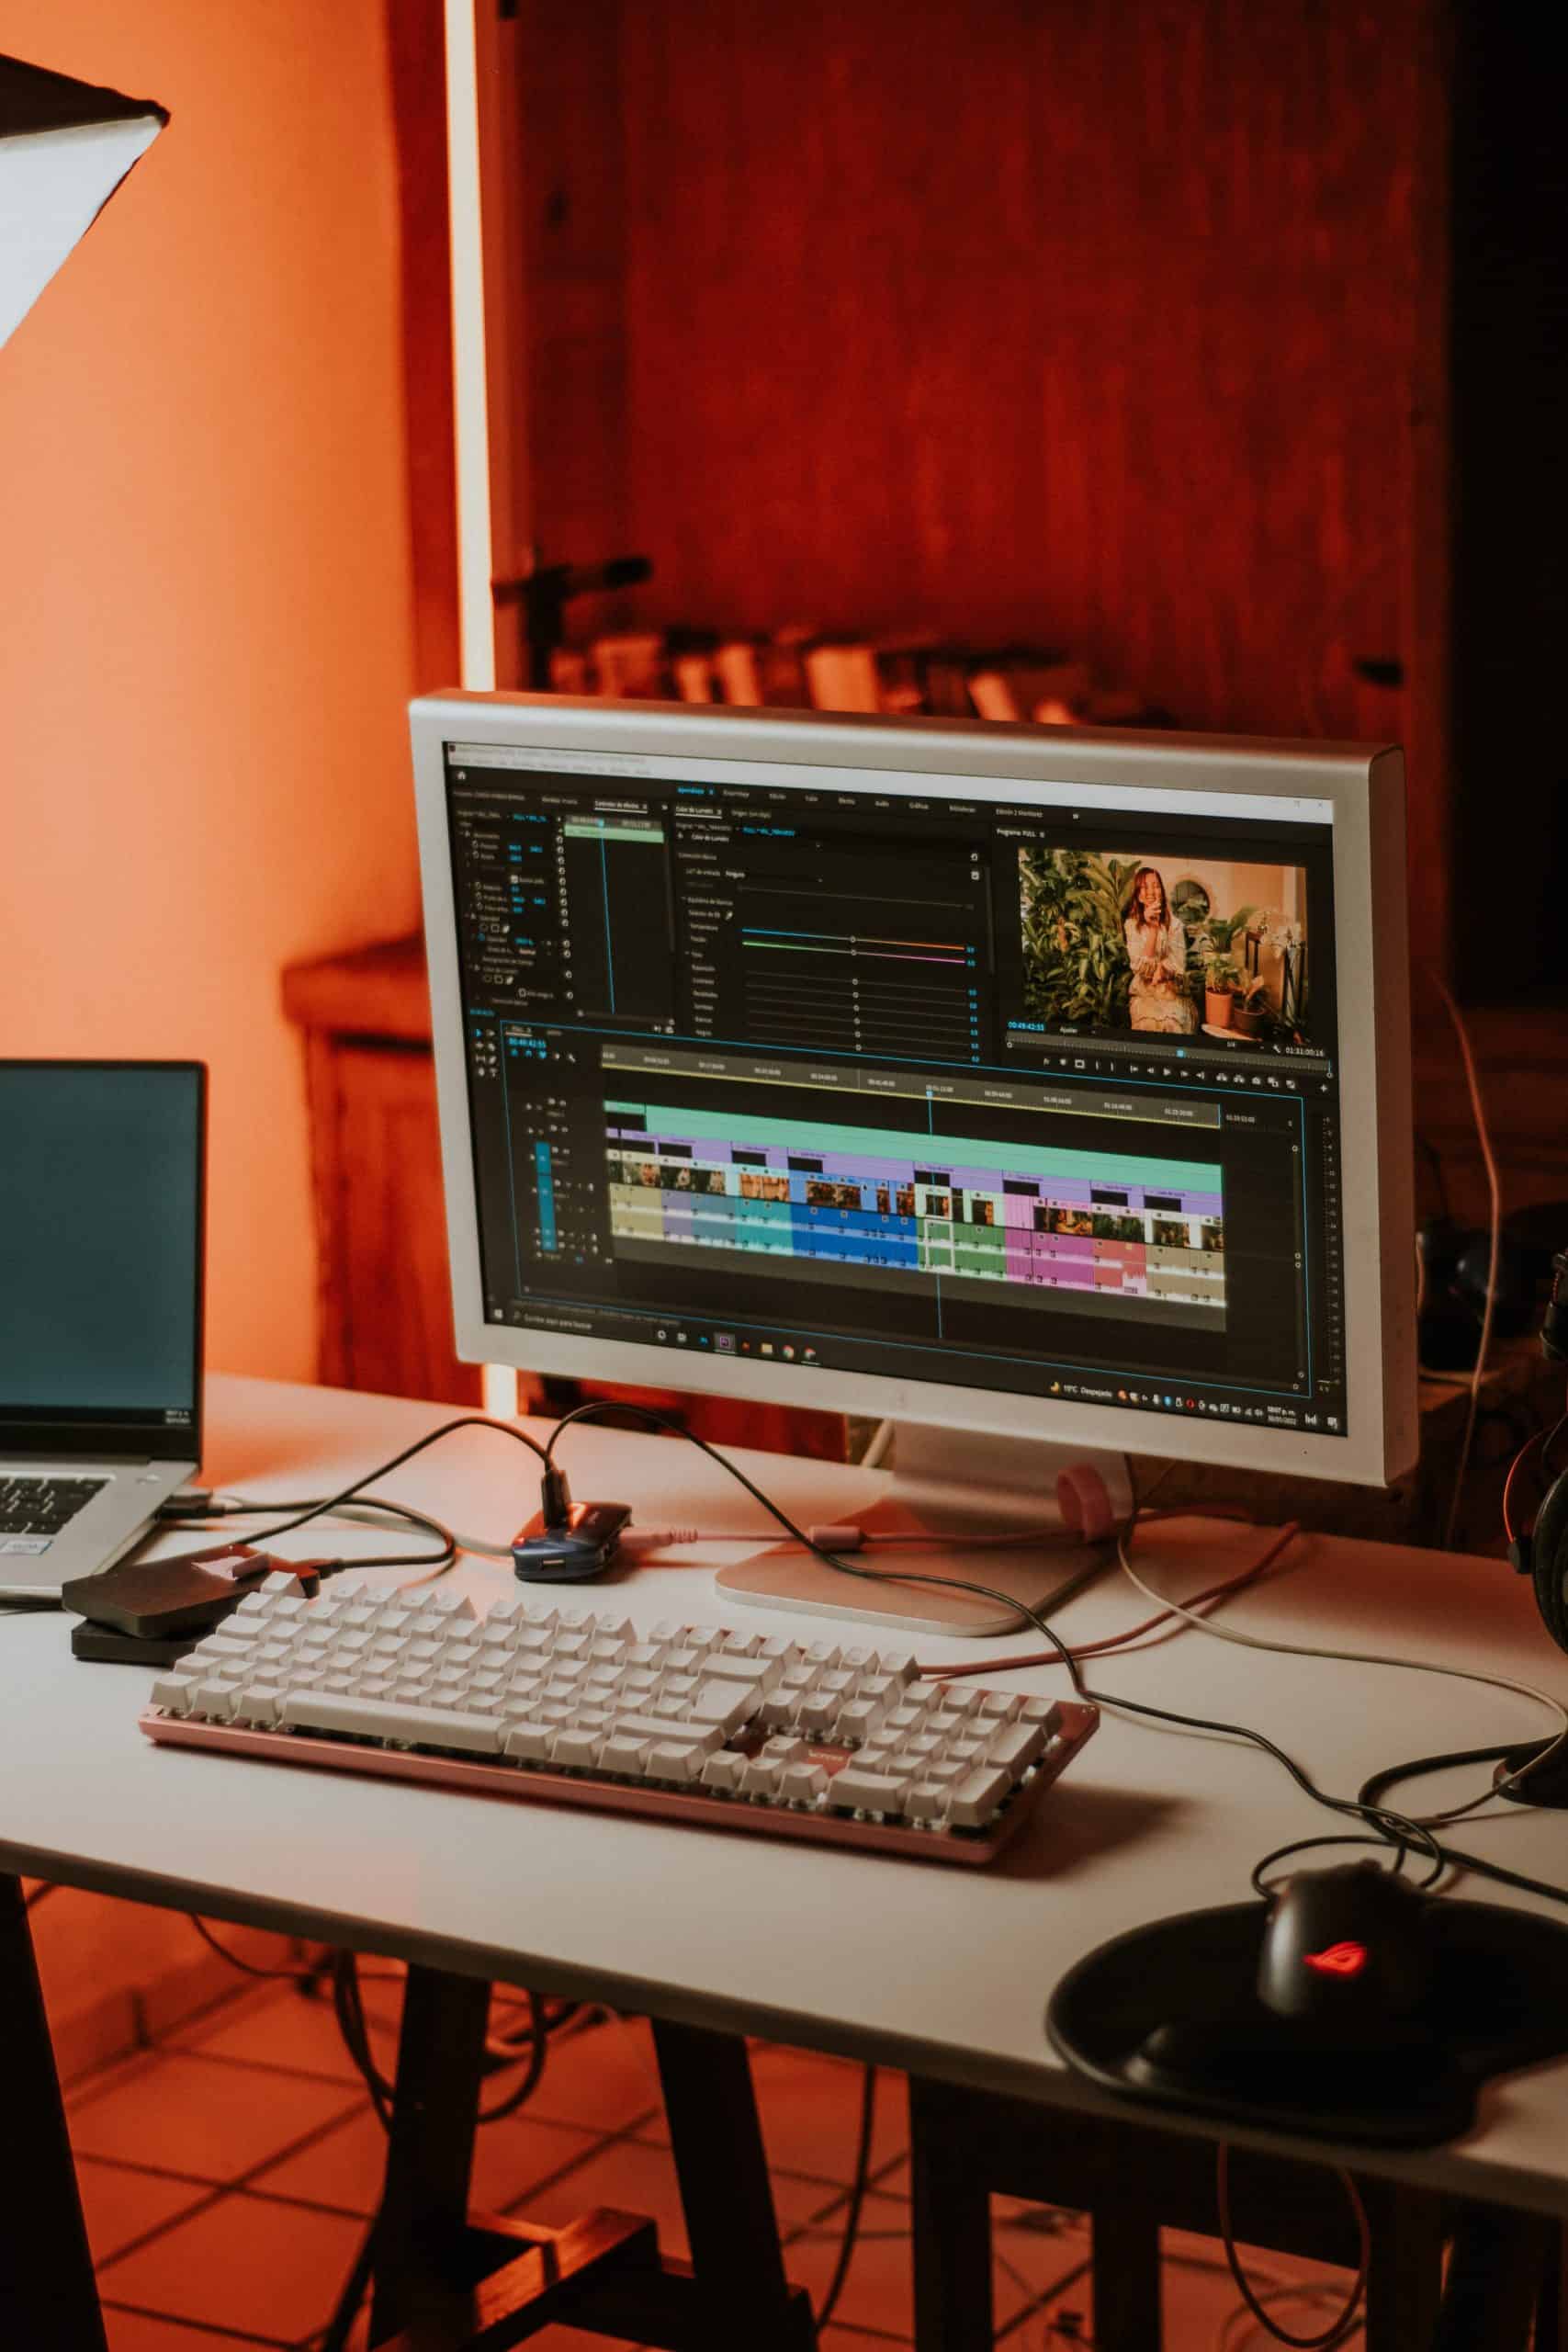 Tips for improving your video editing skills